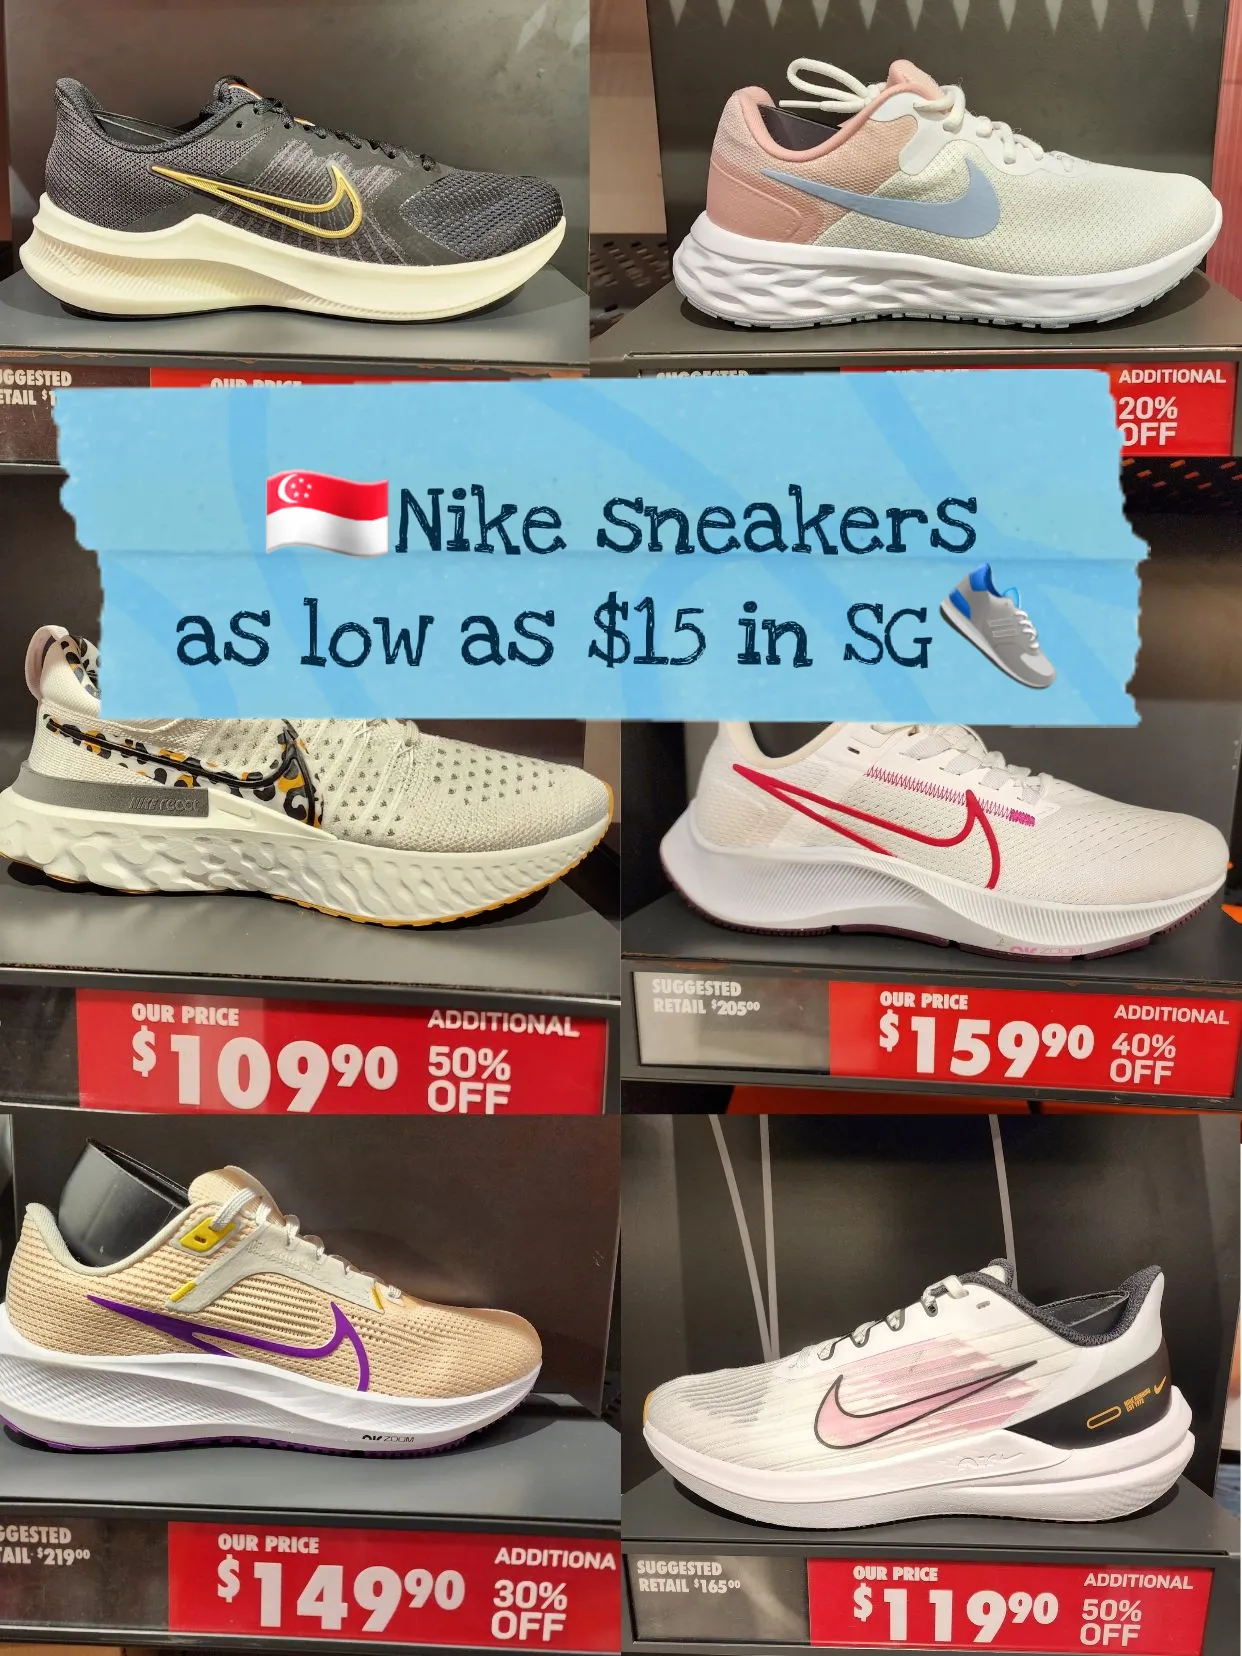 🇸🇬Nike sneakers as low as $15 in SG 👟 's images